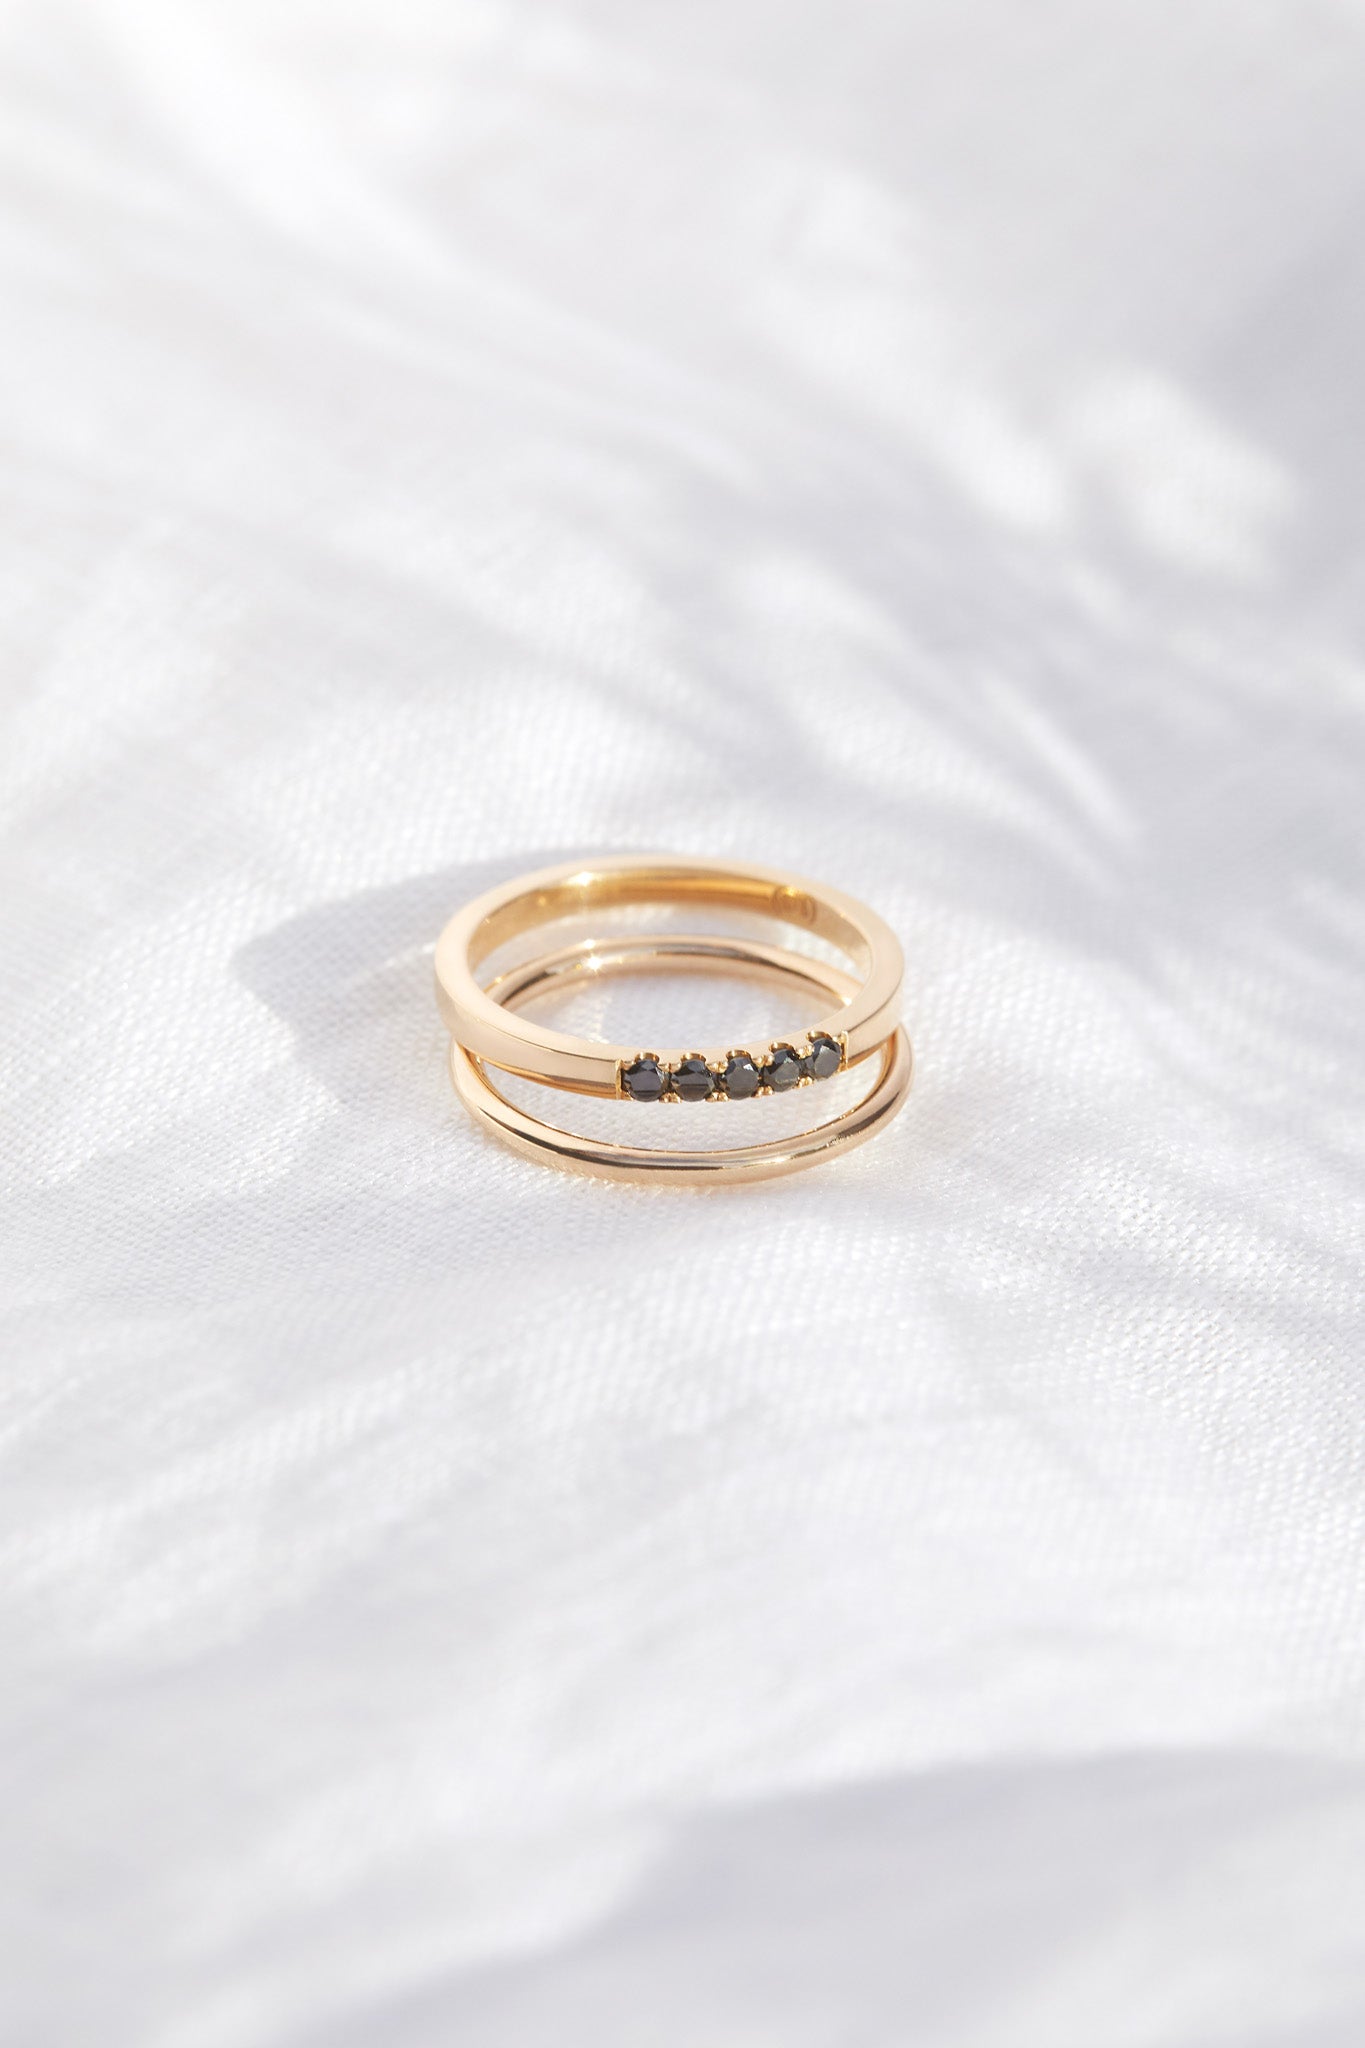 Celine Ring in 9ct Yellow Gold